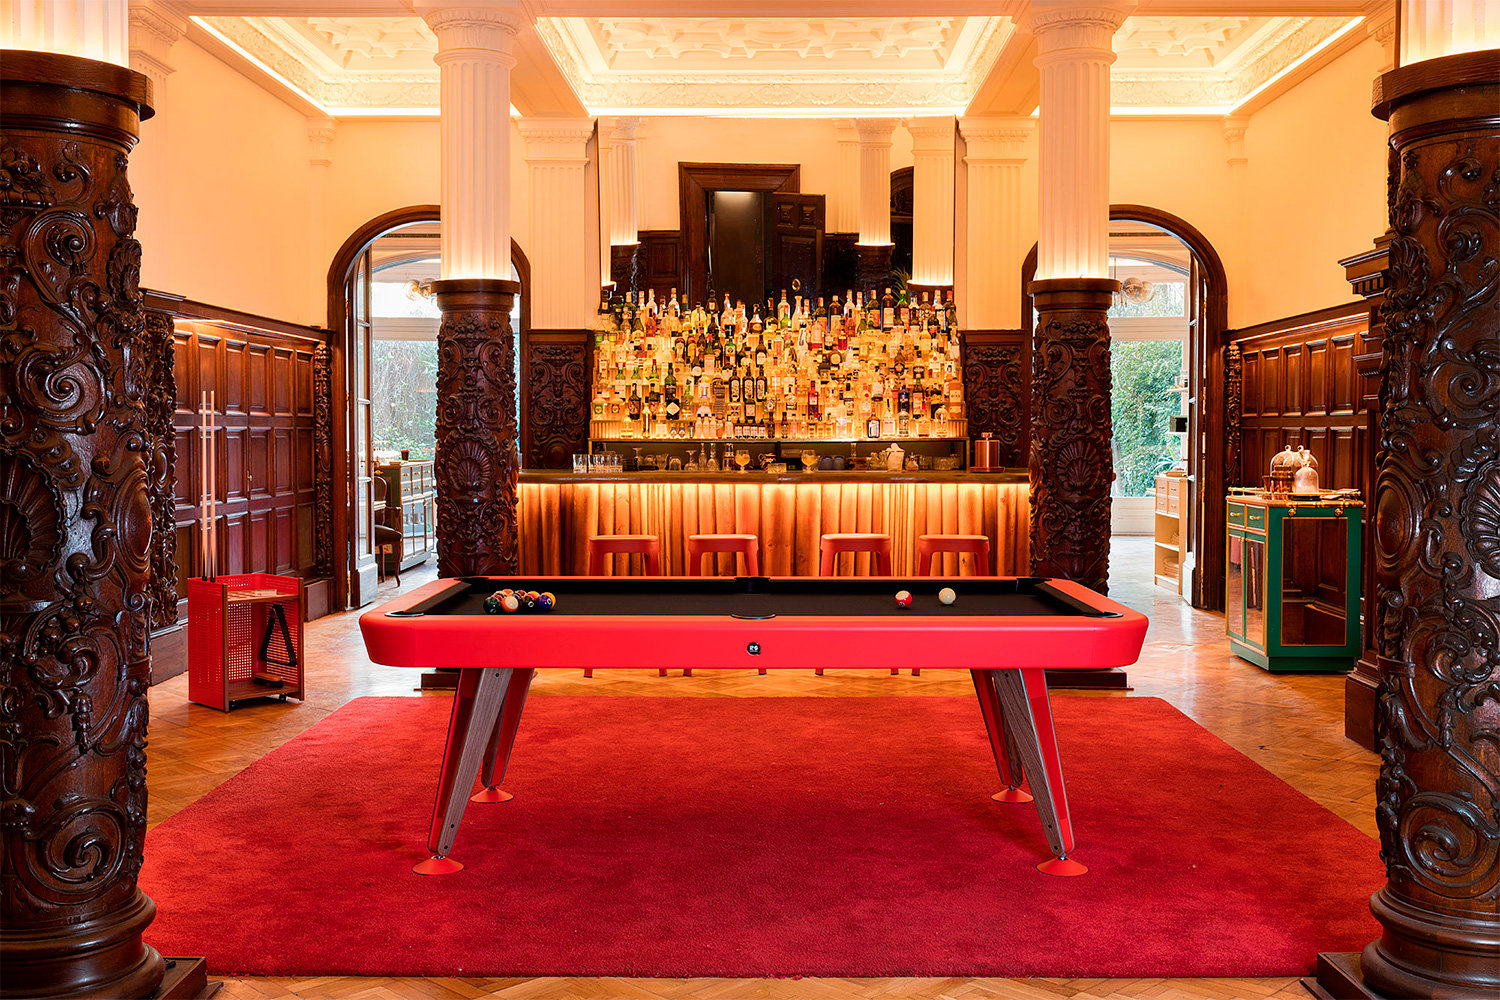 Luxury Hotel Game Tables and Furniture for Indoors and Outdoors